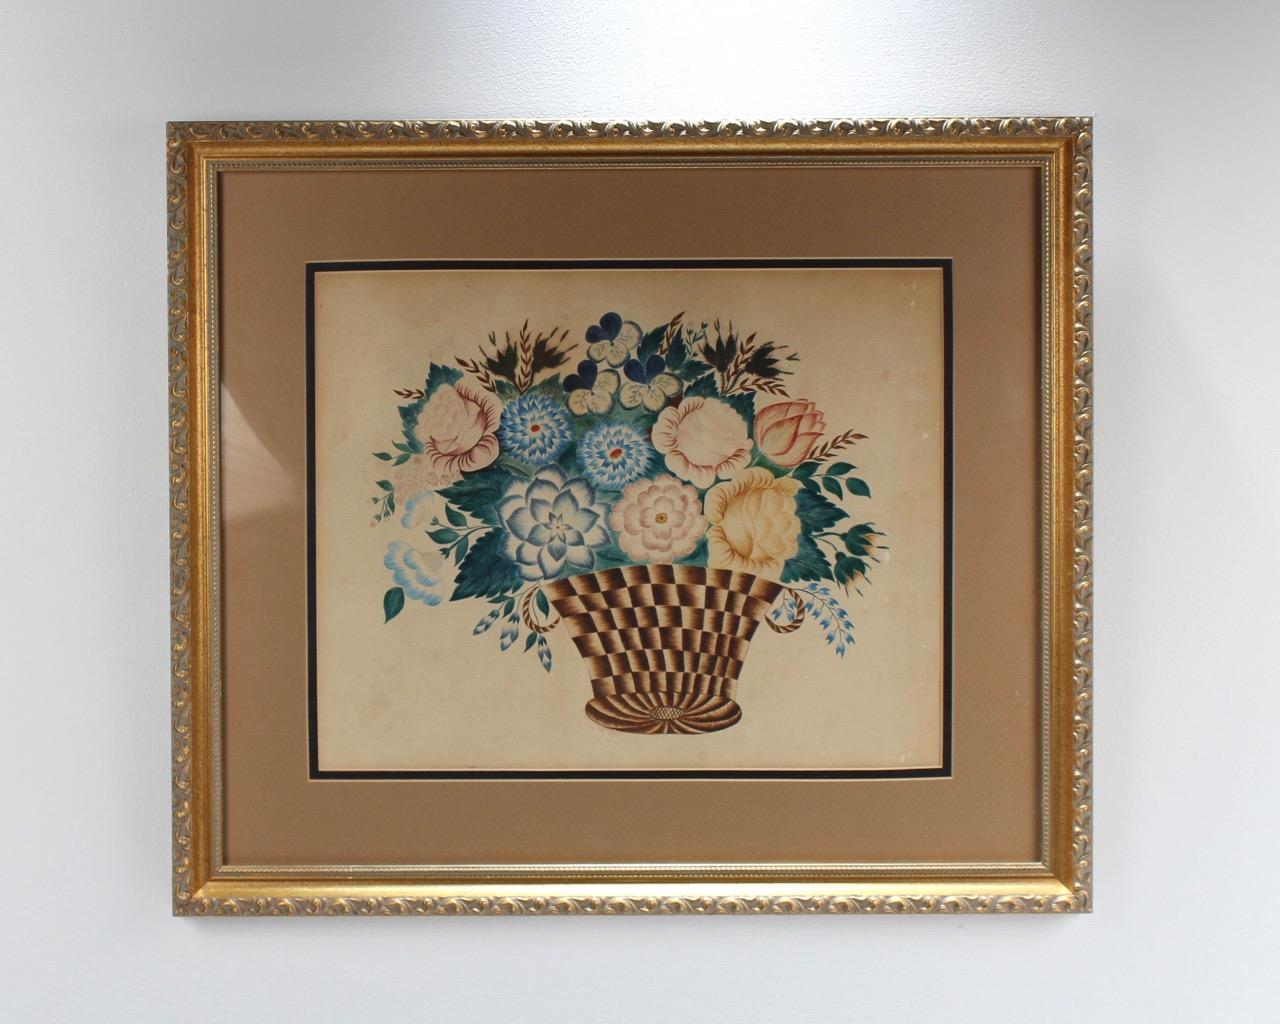 A very fine antique watercolor theorem of a basket with flowers.

Simply a compelling piece or American Folk Art!

Principally painted in blue and green tones for the flowers and leaf work. The basket comprised of browns. Painted on paper.